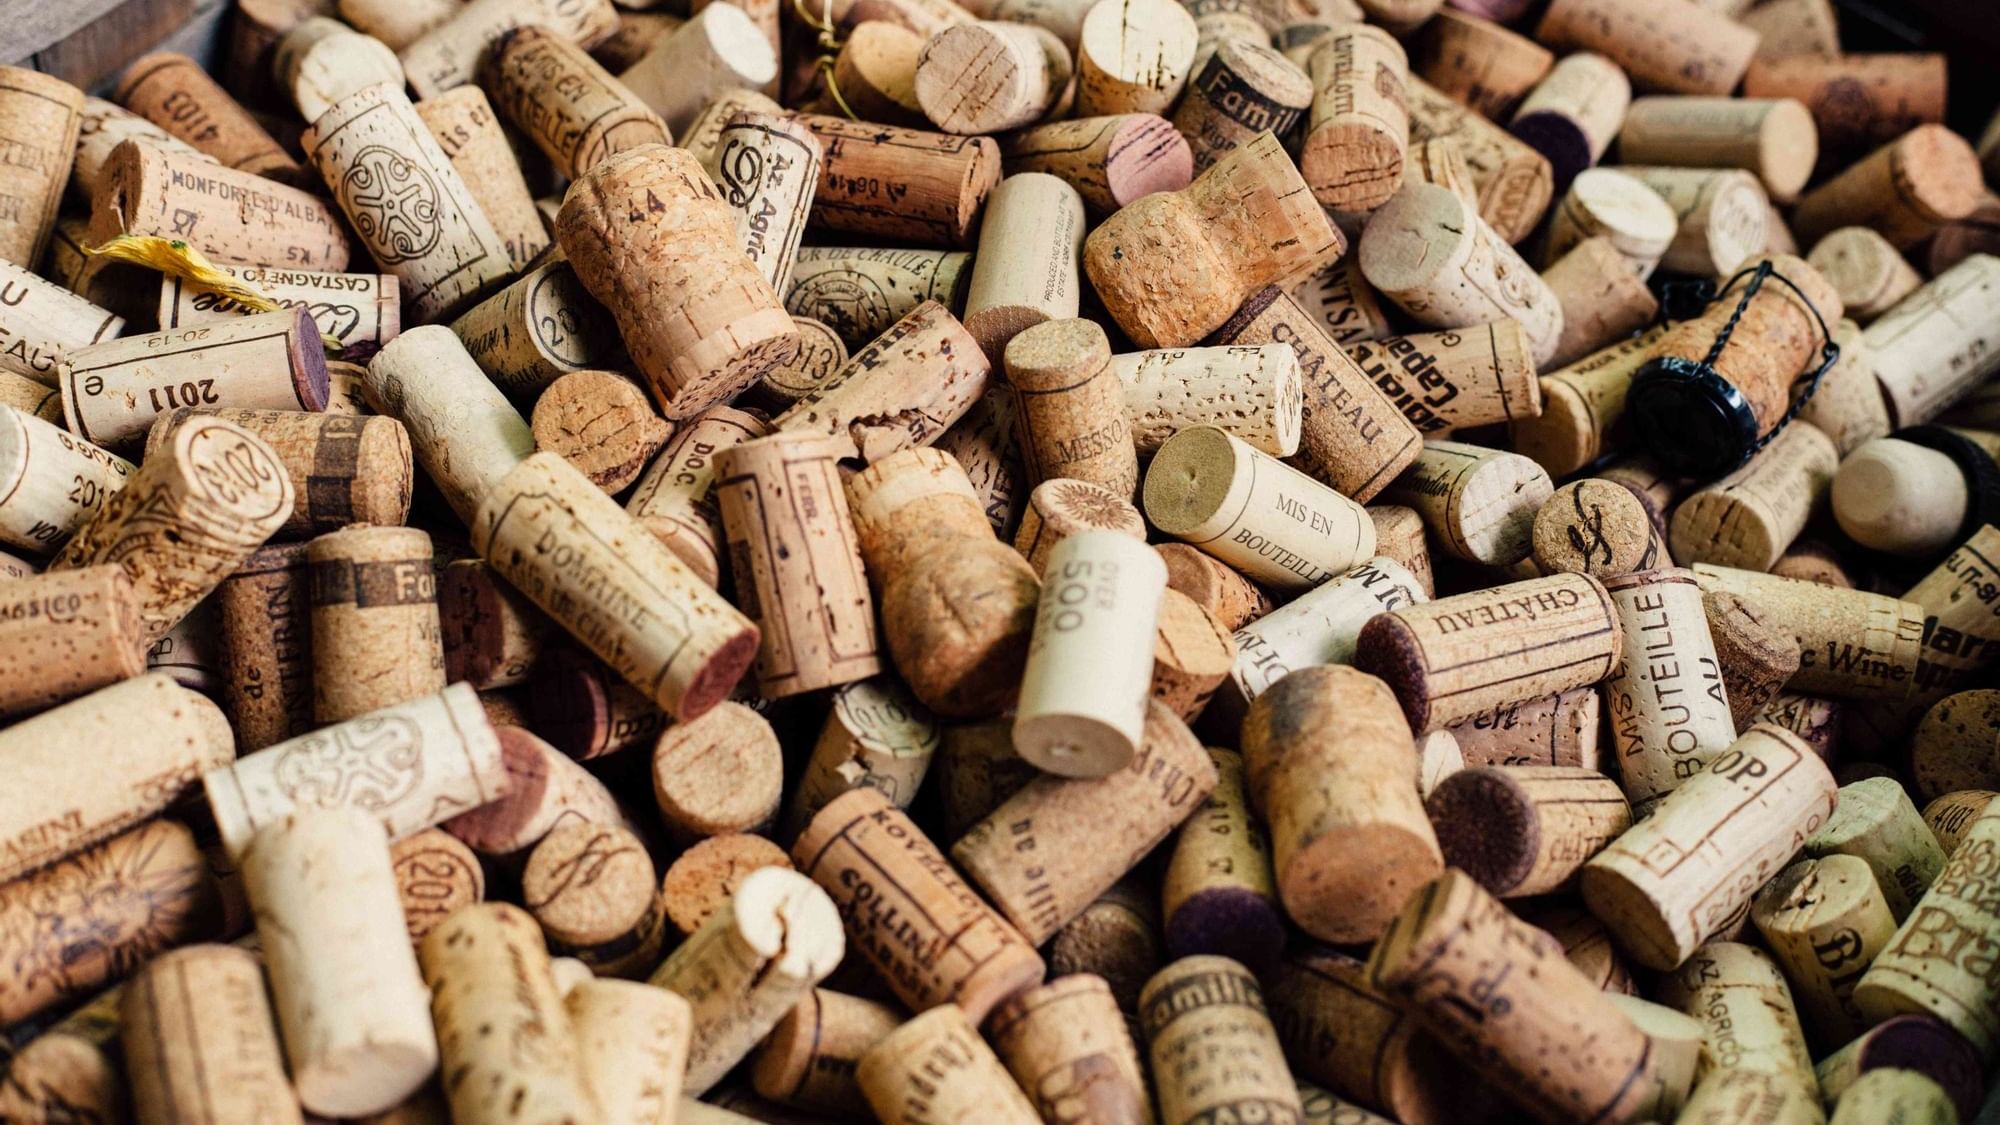 Collection of Wine Corks at The Original Hotels